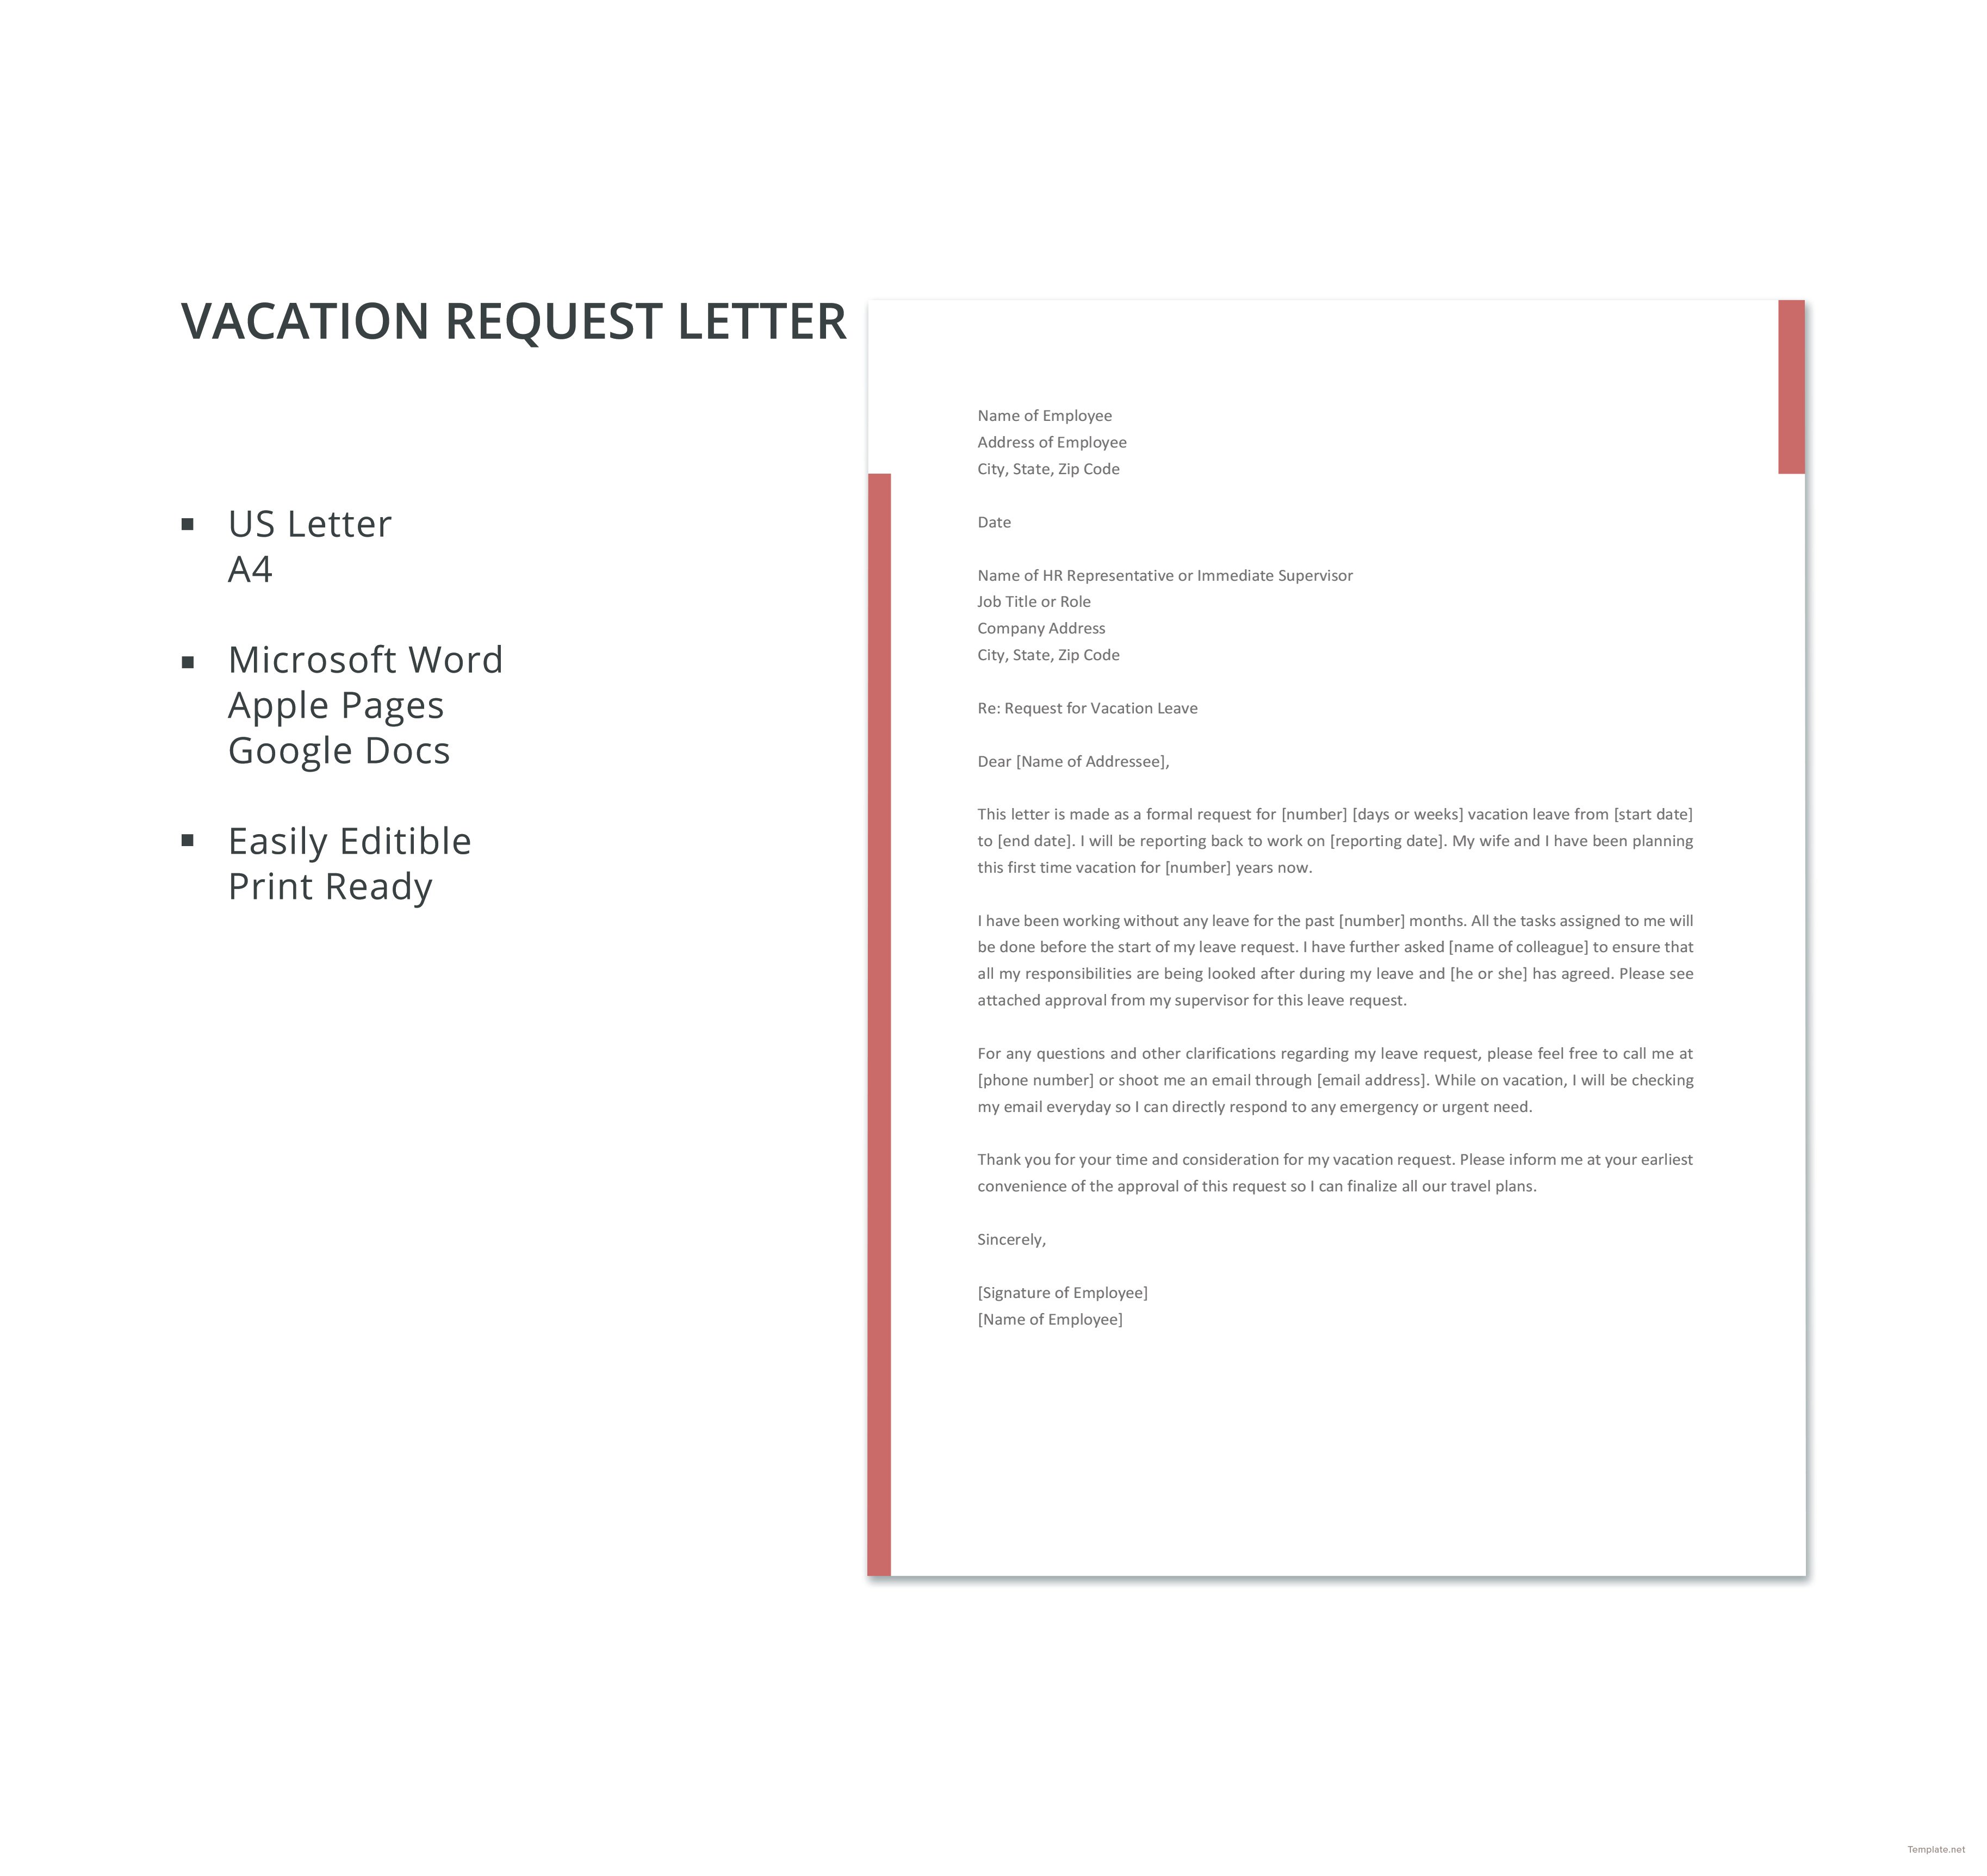 Vacation Request Letter Template in Microsoft Word, Apple Pages, Google